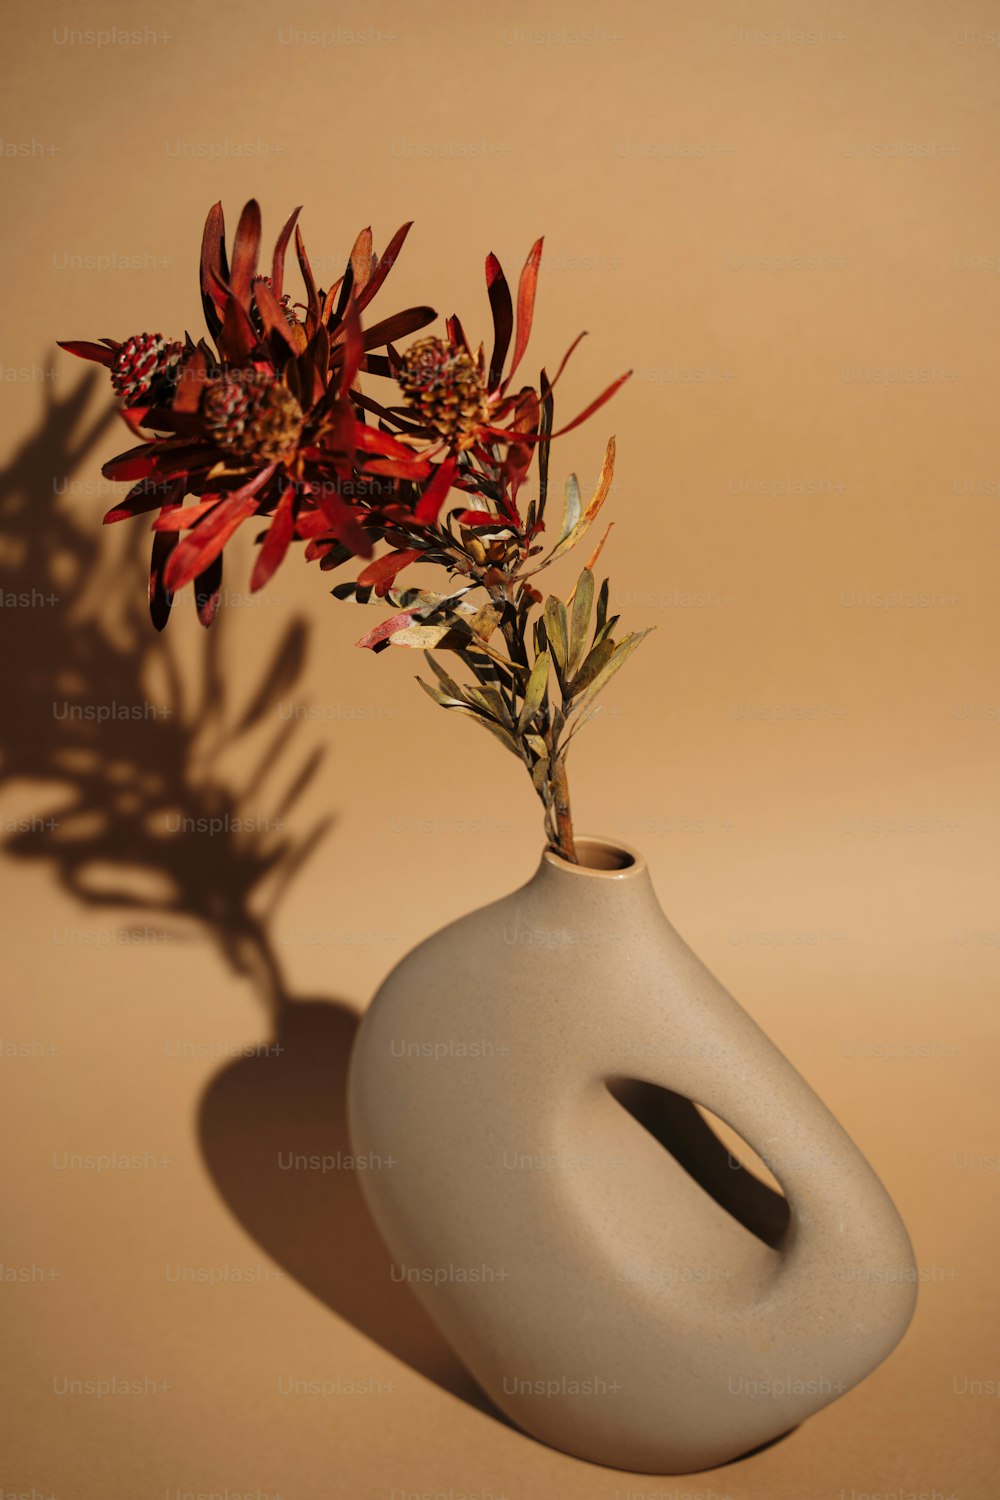 a white vase with some flowers in it